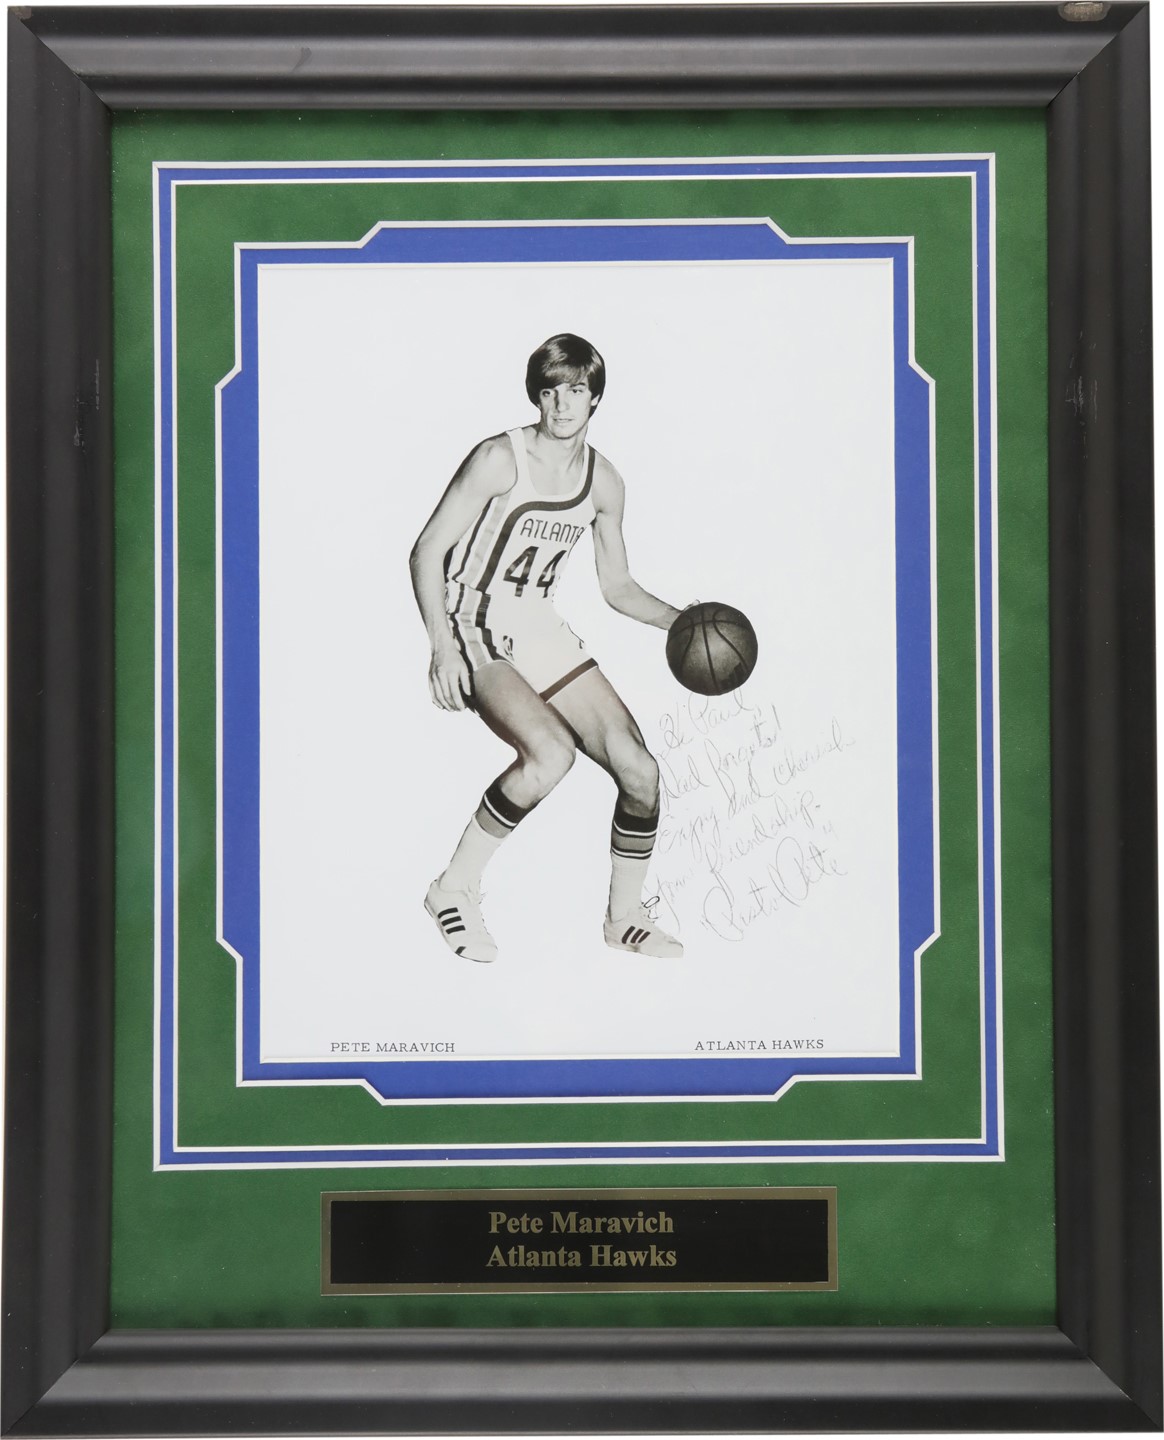 - Pete Maravich Signed Photograph with Signed Letter from Press Maravich (PSA)